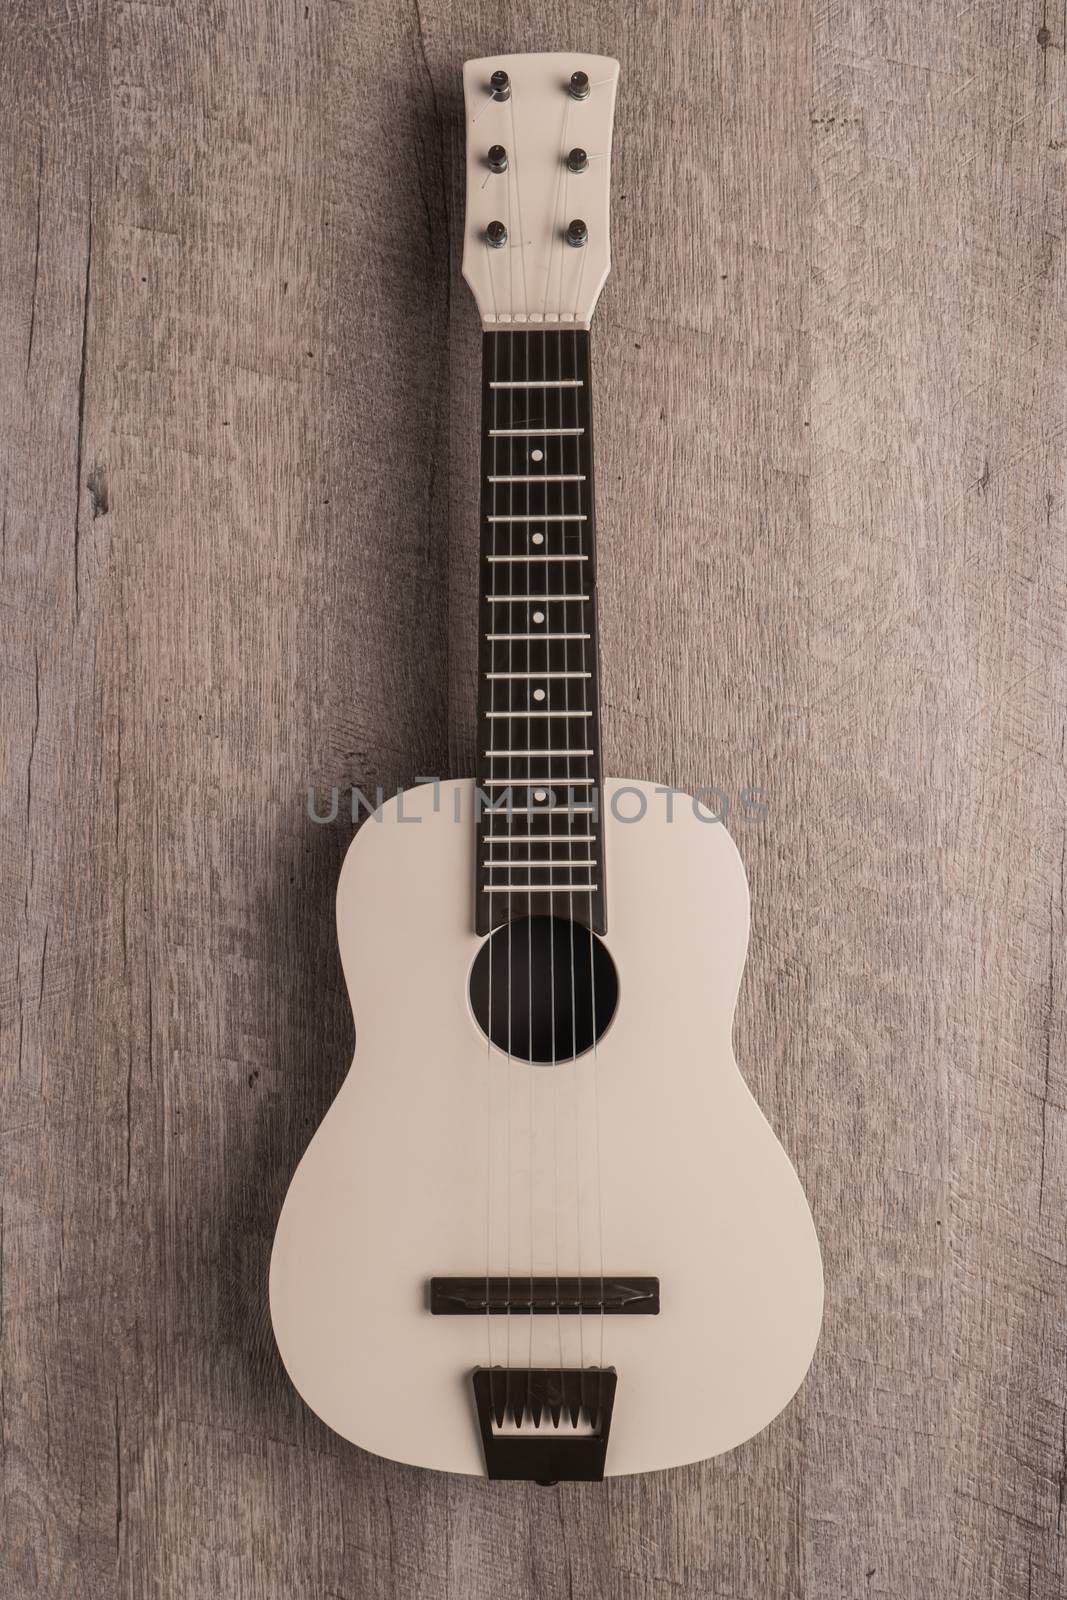 Guitar on rustic wooden background texture. Top view with copy space